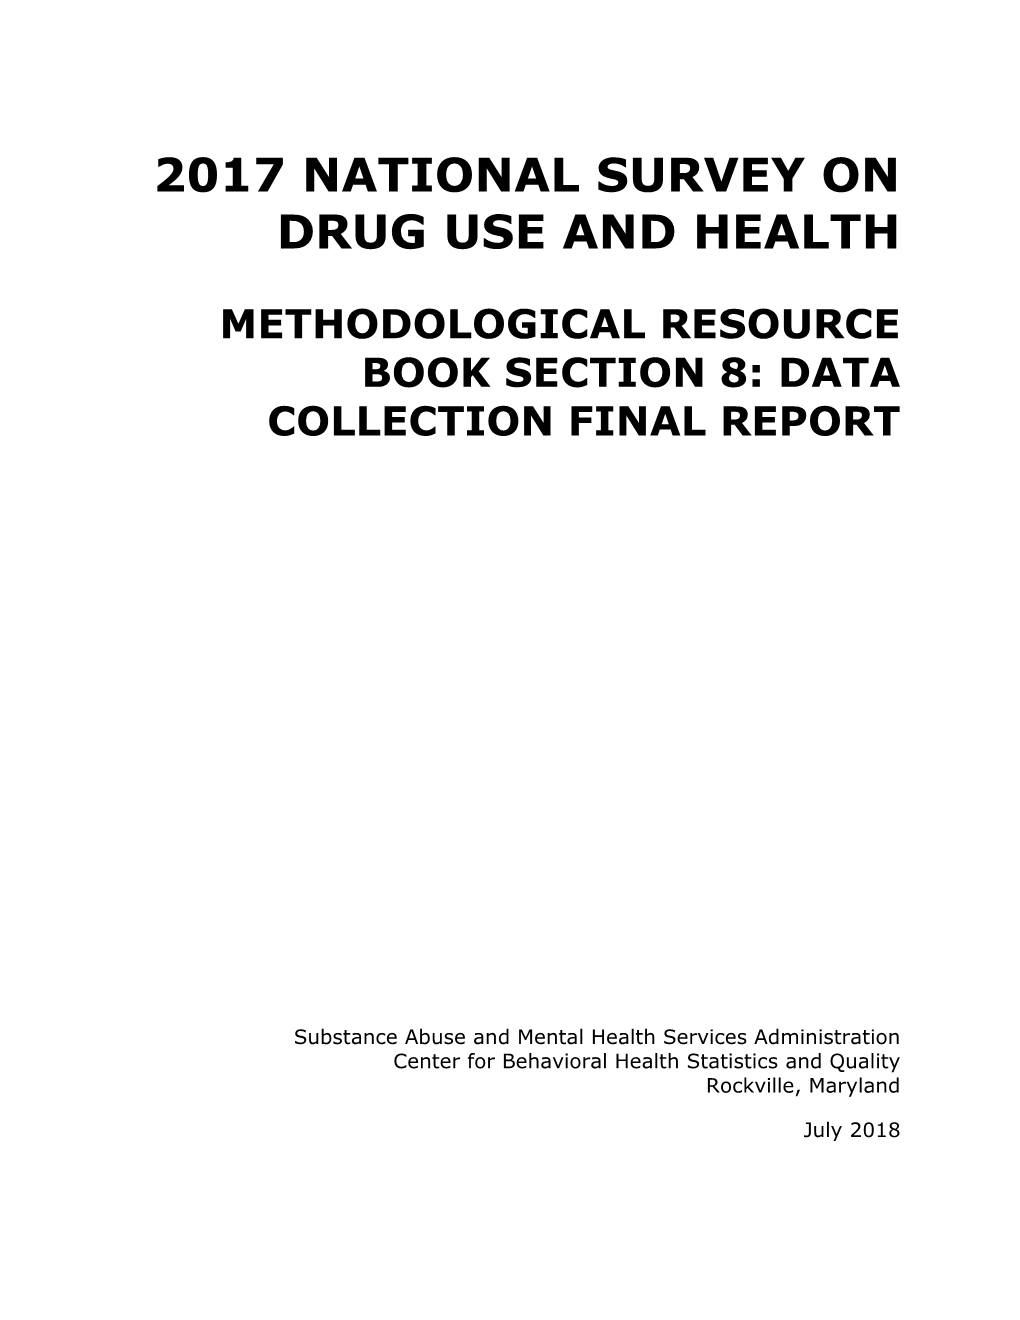 2017 National Survey on Drug Use and Health: Methodological Resource Book (Section 8, Data Collection Final Report)